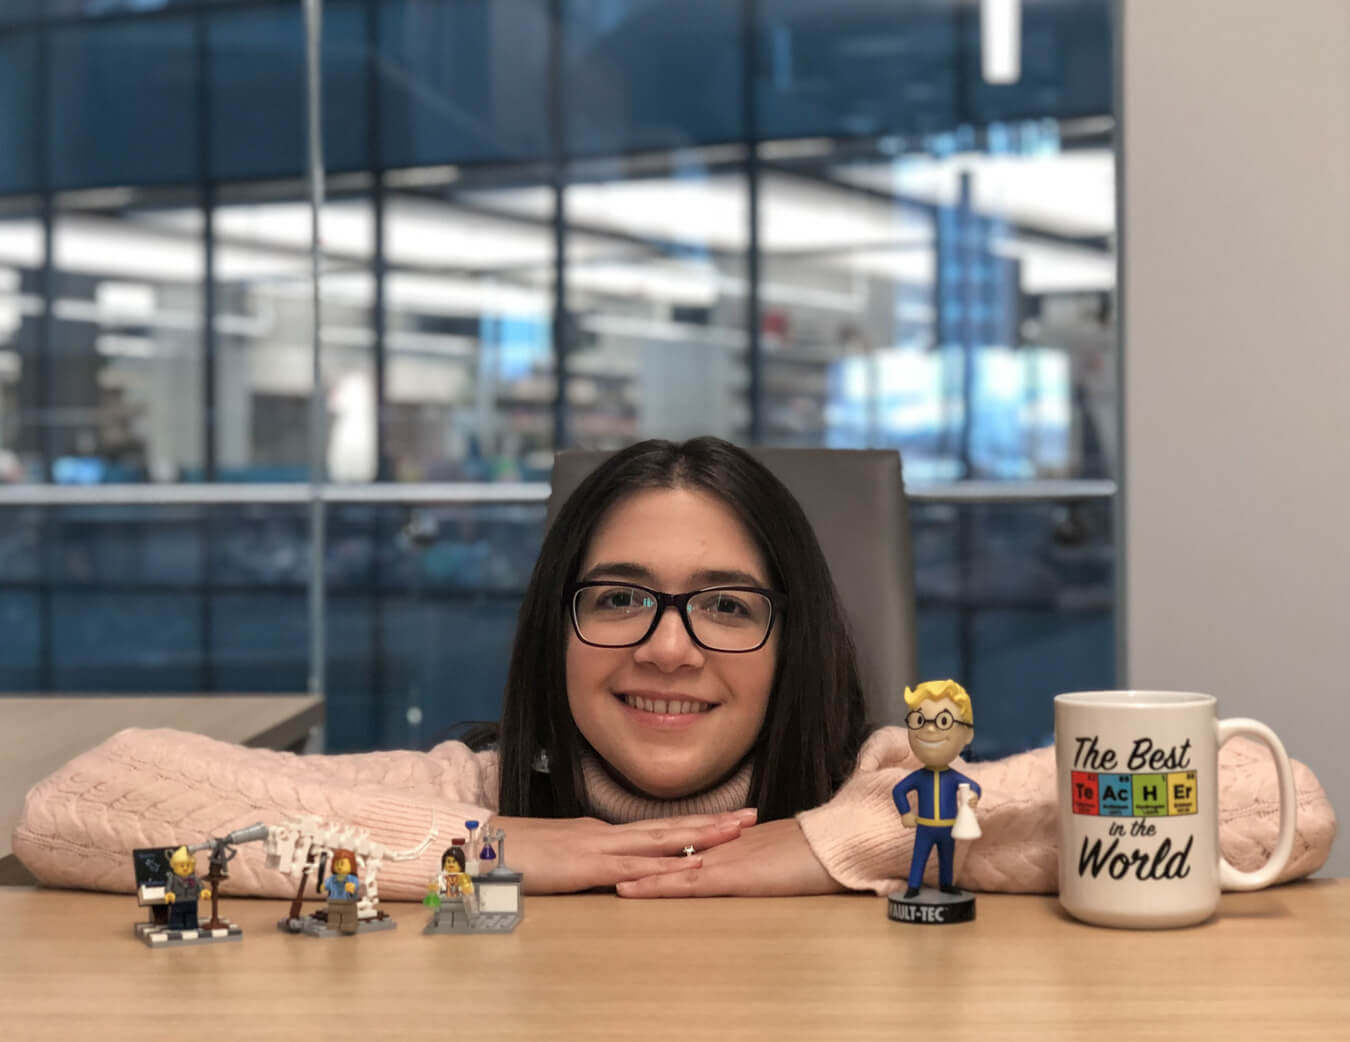 A picture of Amanda Tiano. She is posing for the camera with both arms on a desk and smiling. On the desk with her are various items such as a mug, a vault-boy bobblehead, and lego figurines.